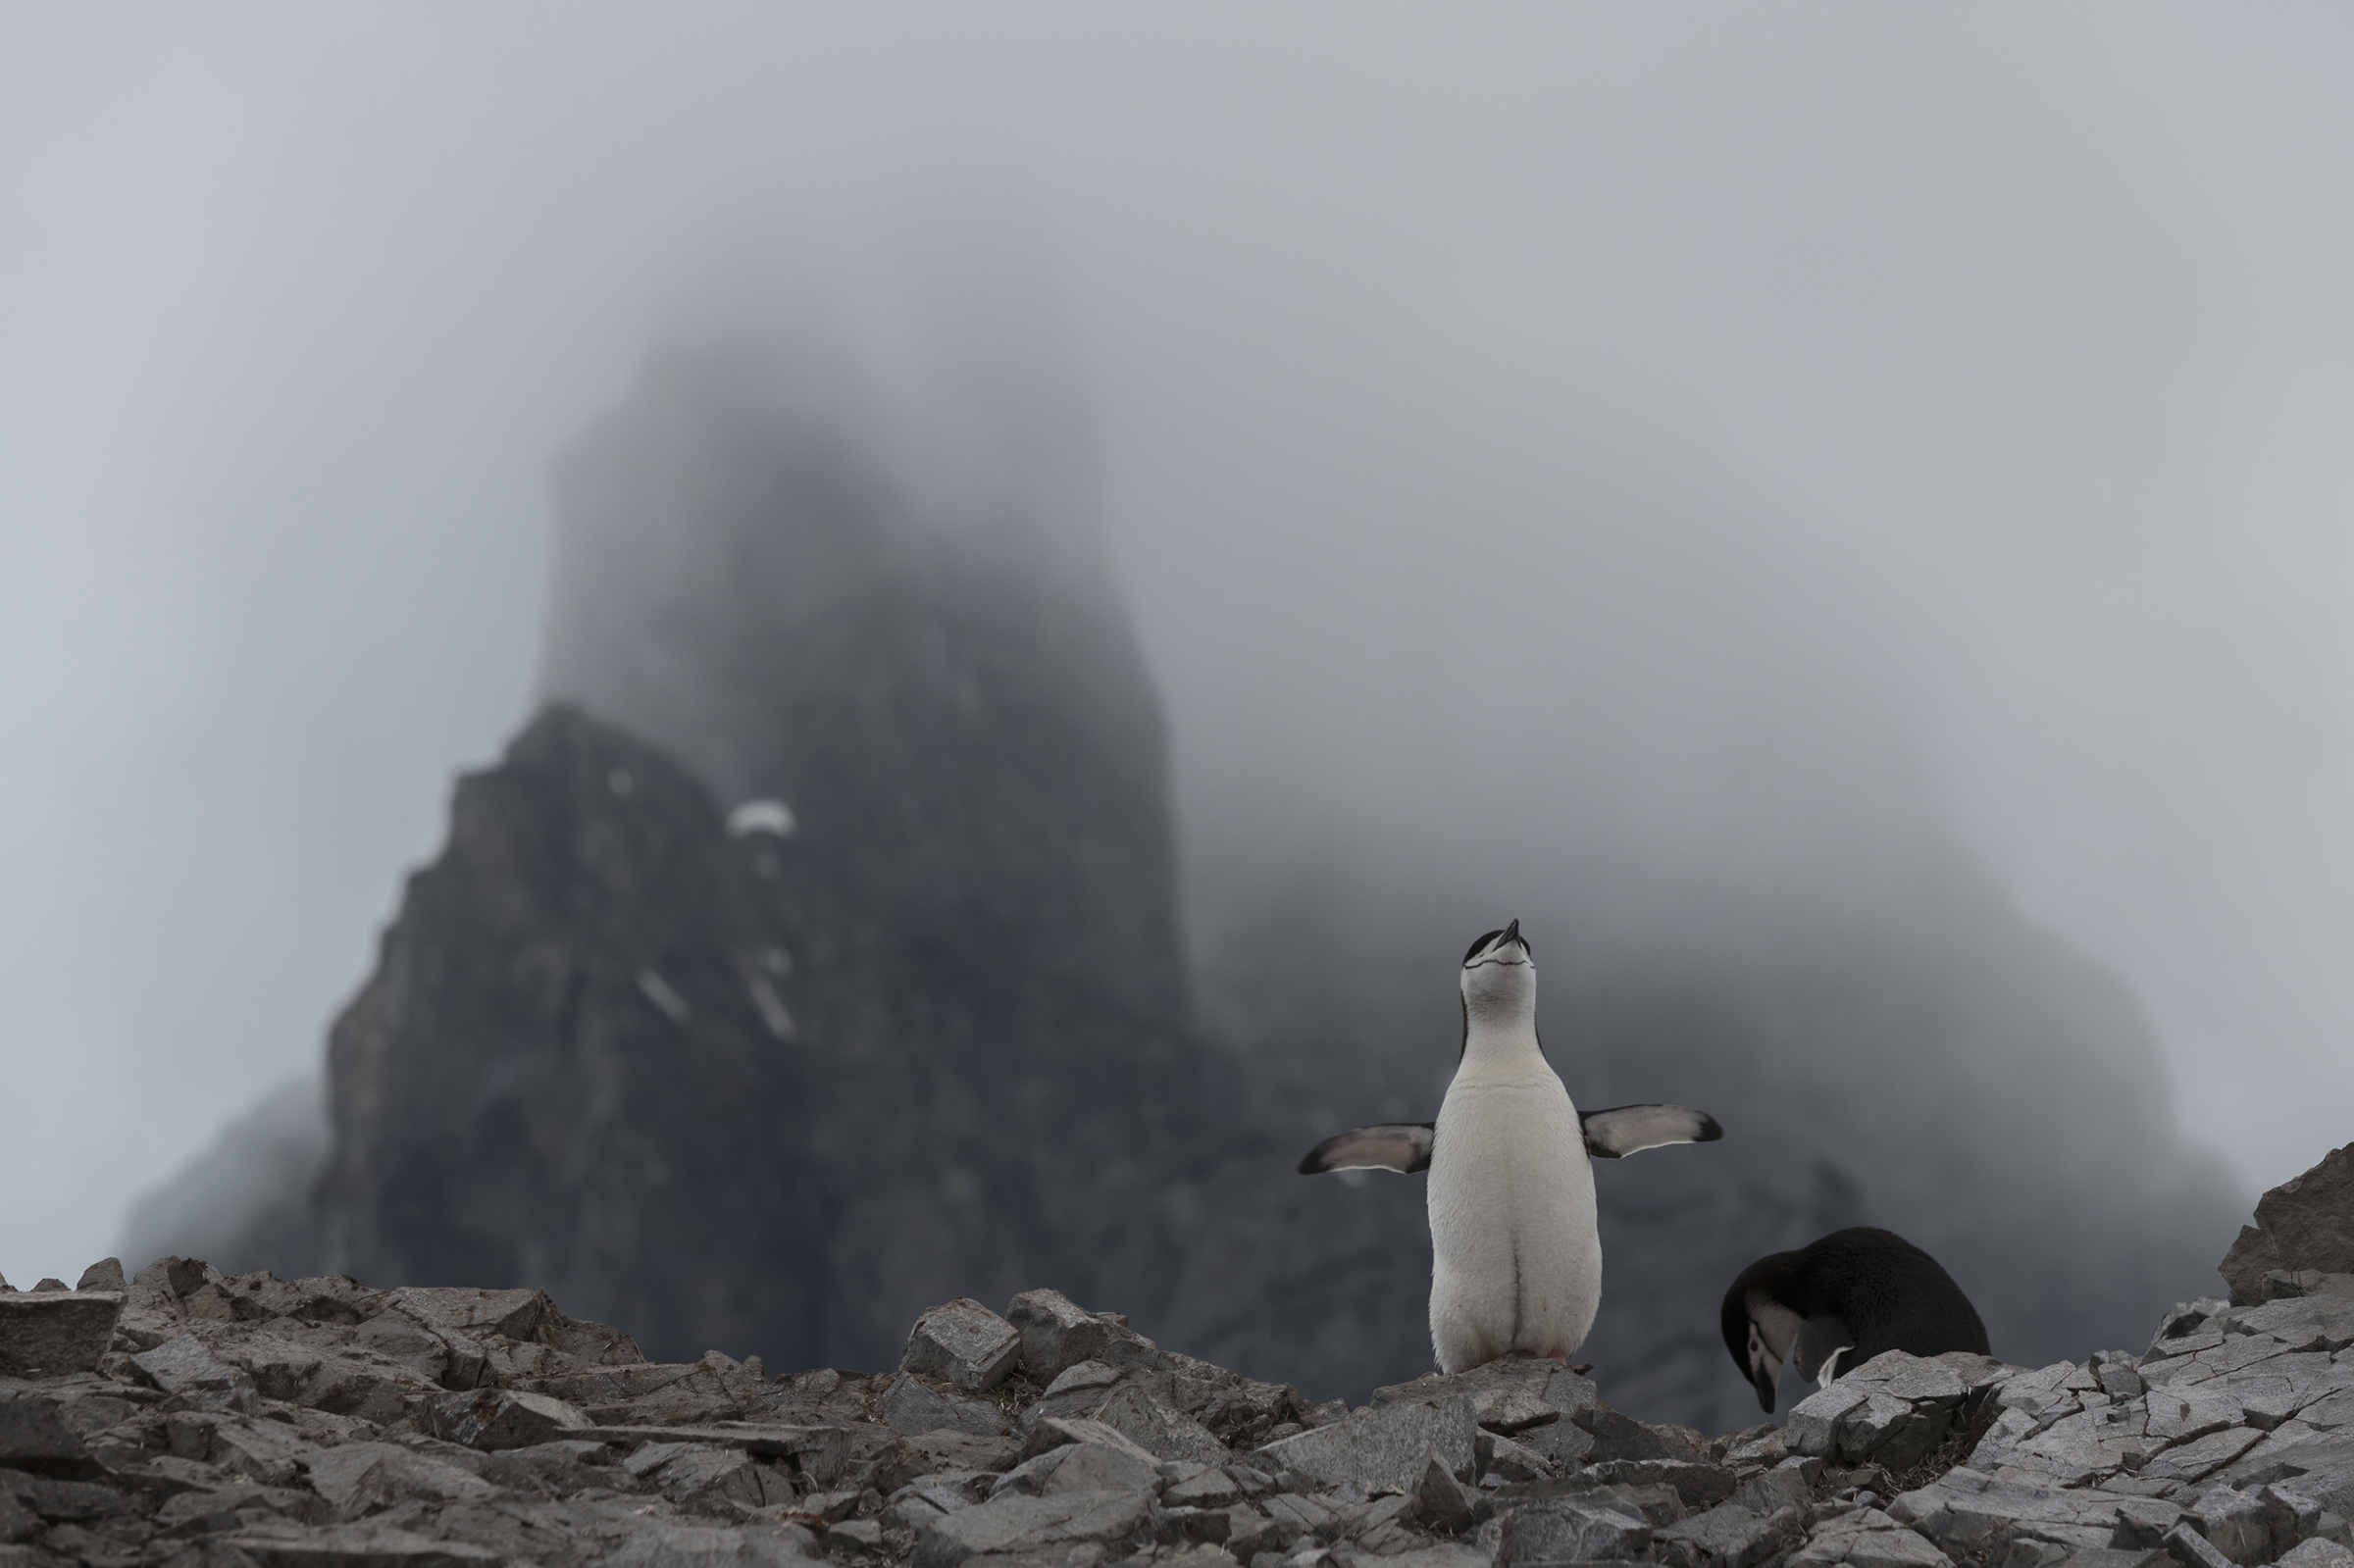 A chinstrap penguin nesting at Spigot Peak, in Orne Harbor on the Antarctic peninsula, on Feb. 6, 2020. (Christian Åslund —Greenpeace and TIME)